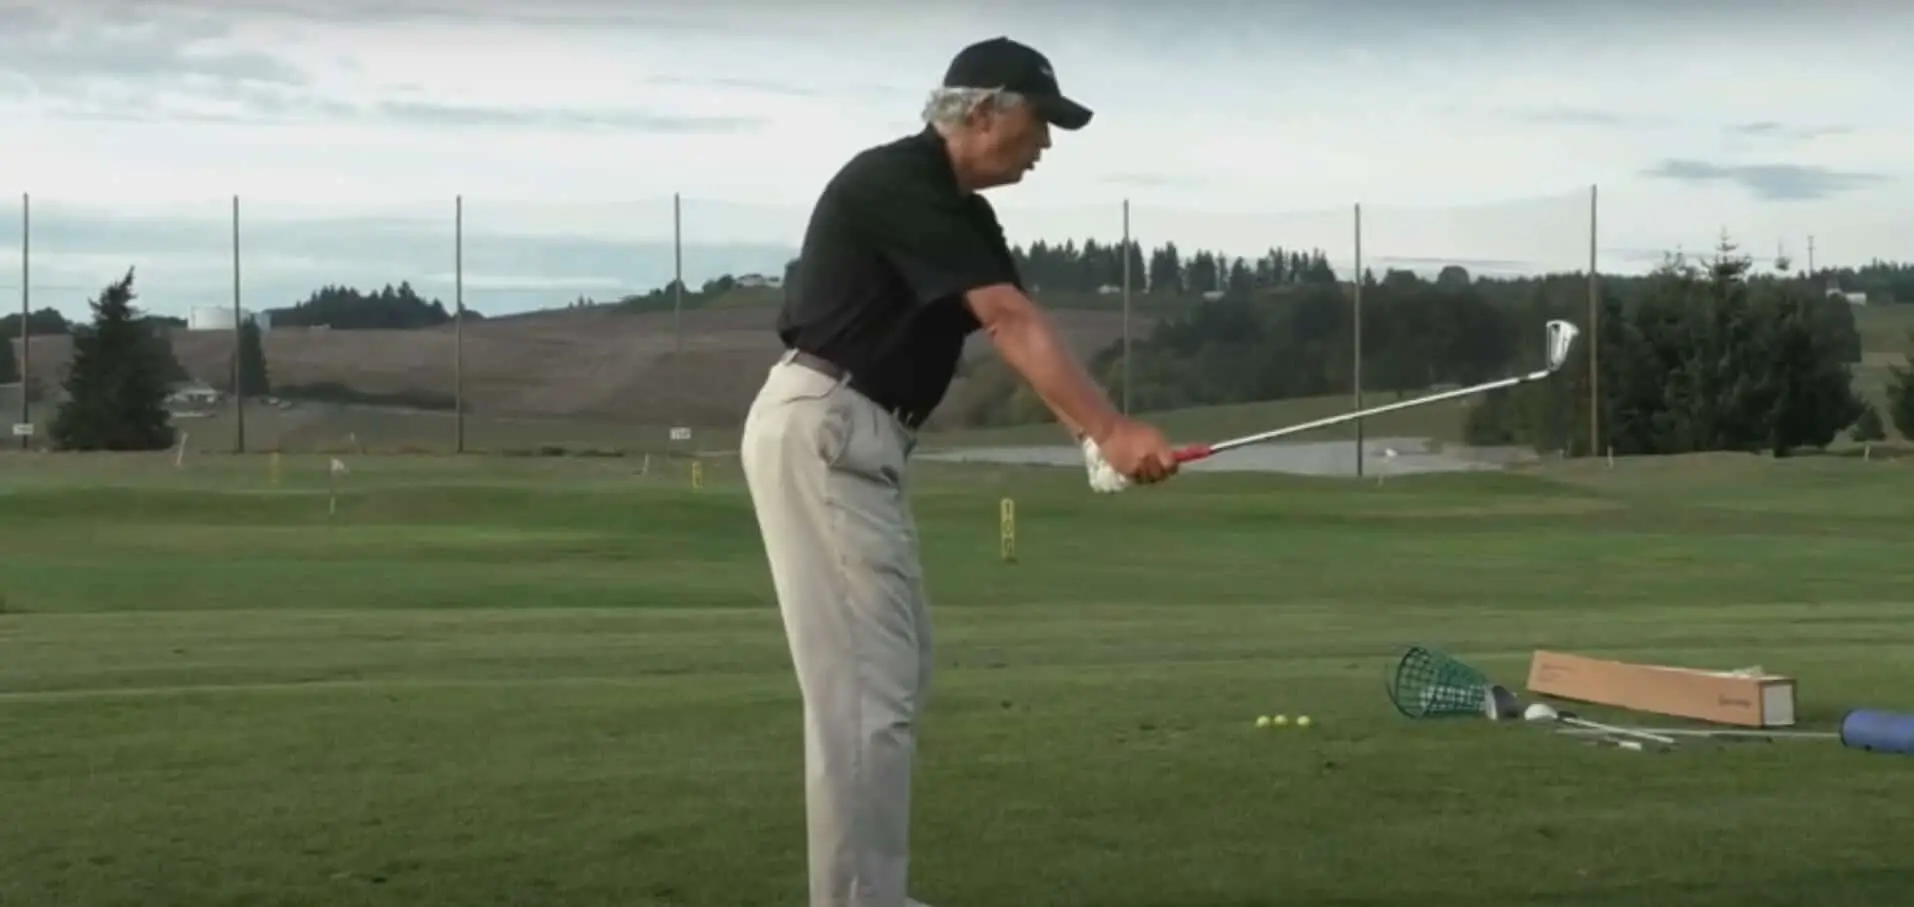 The Arm Swing Illusion - Golf's Missing Link